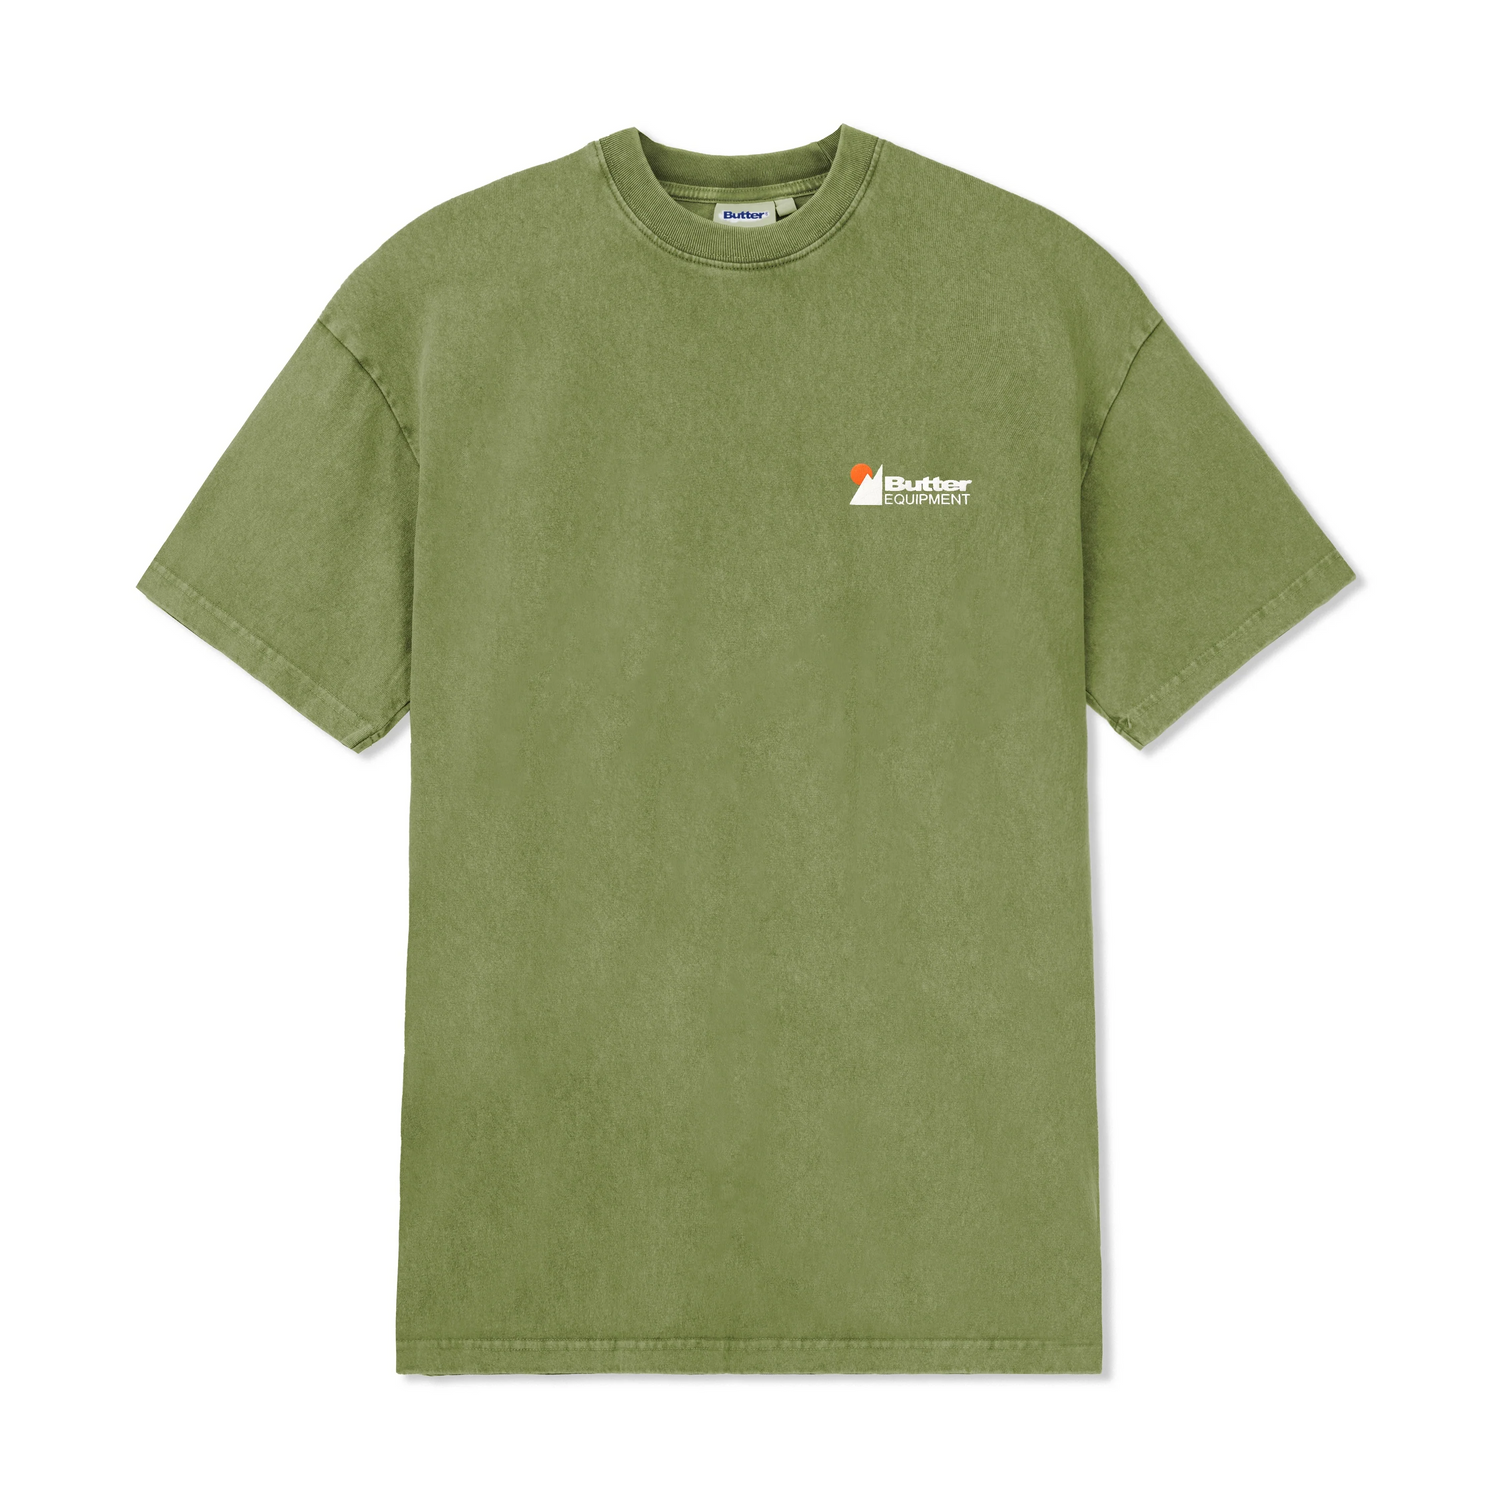 Distressed Pigment Dyed Tee, Washed Army